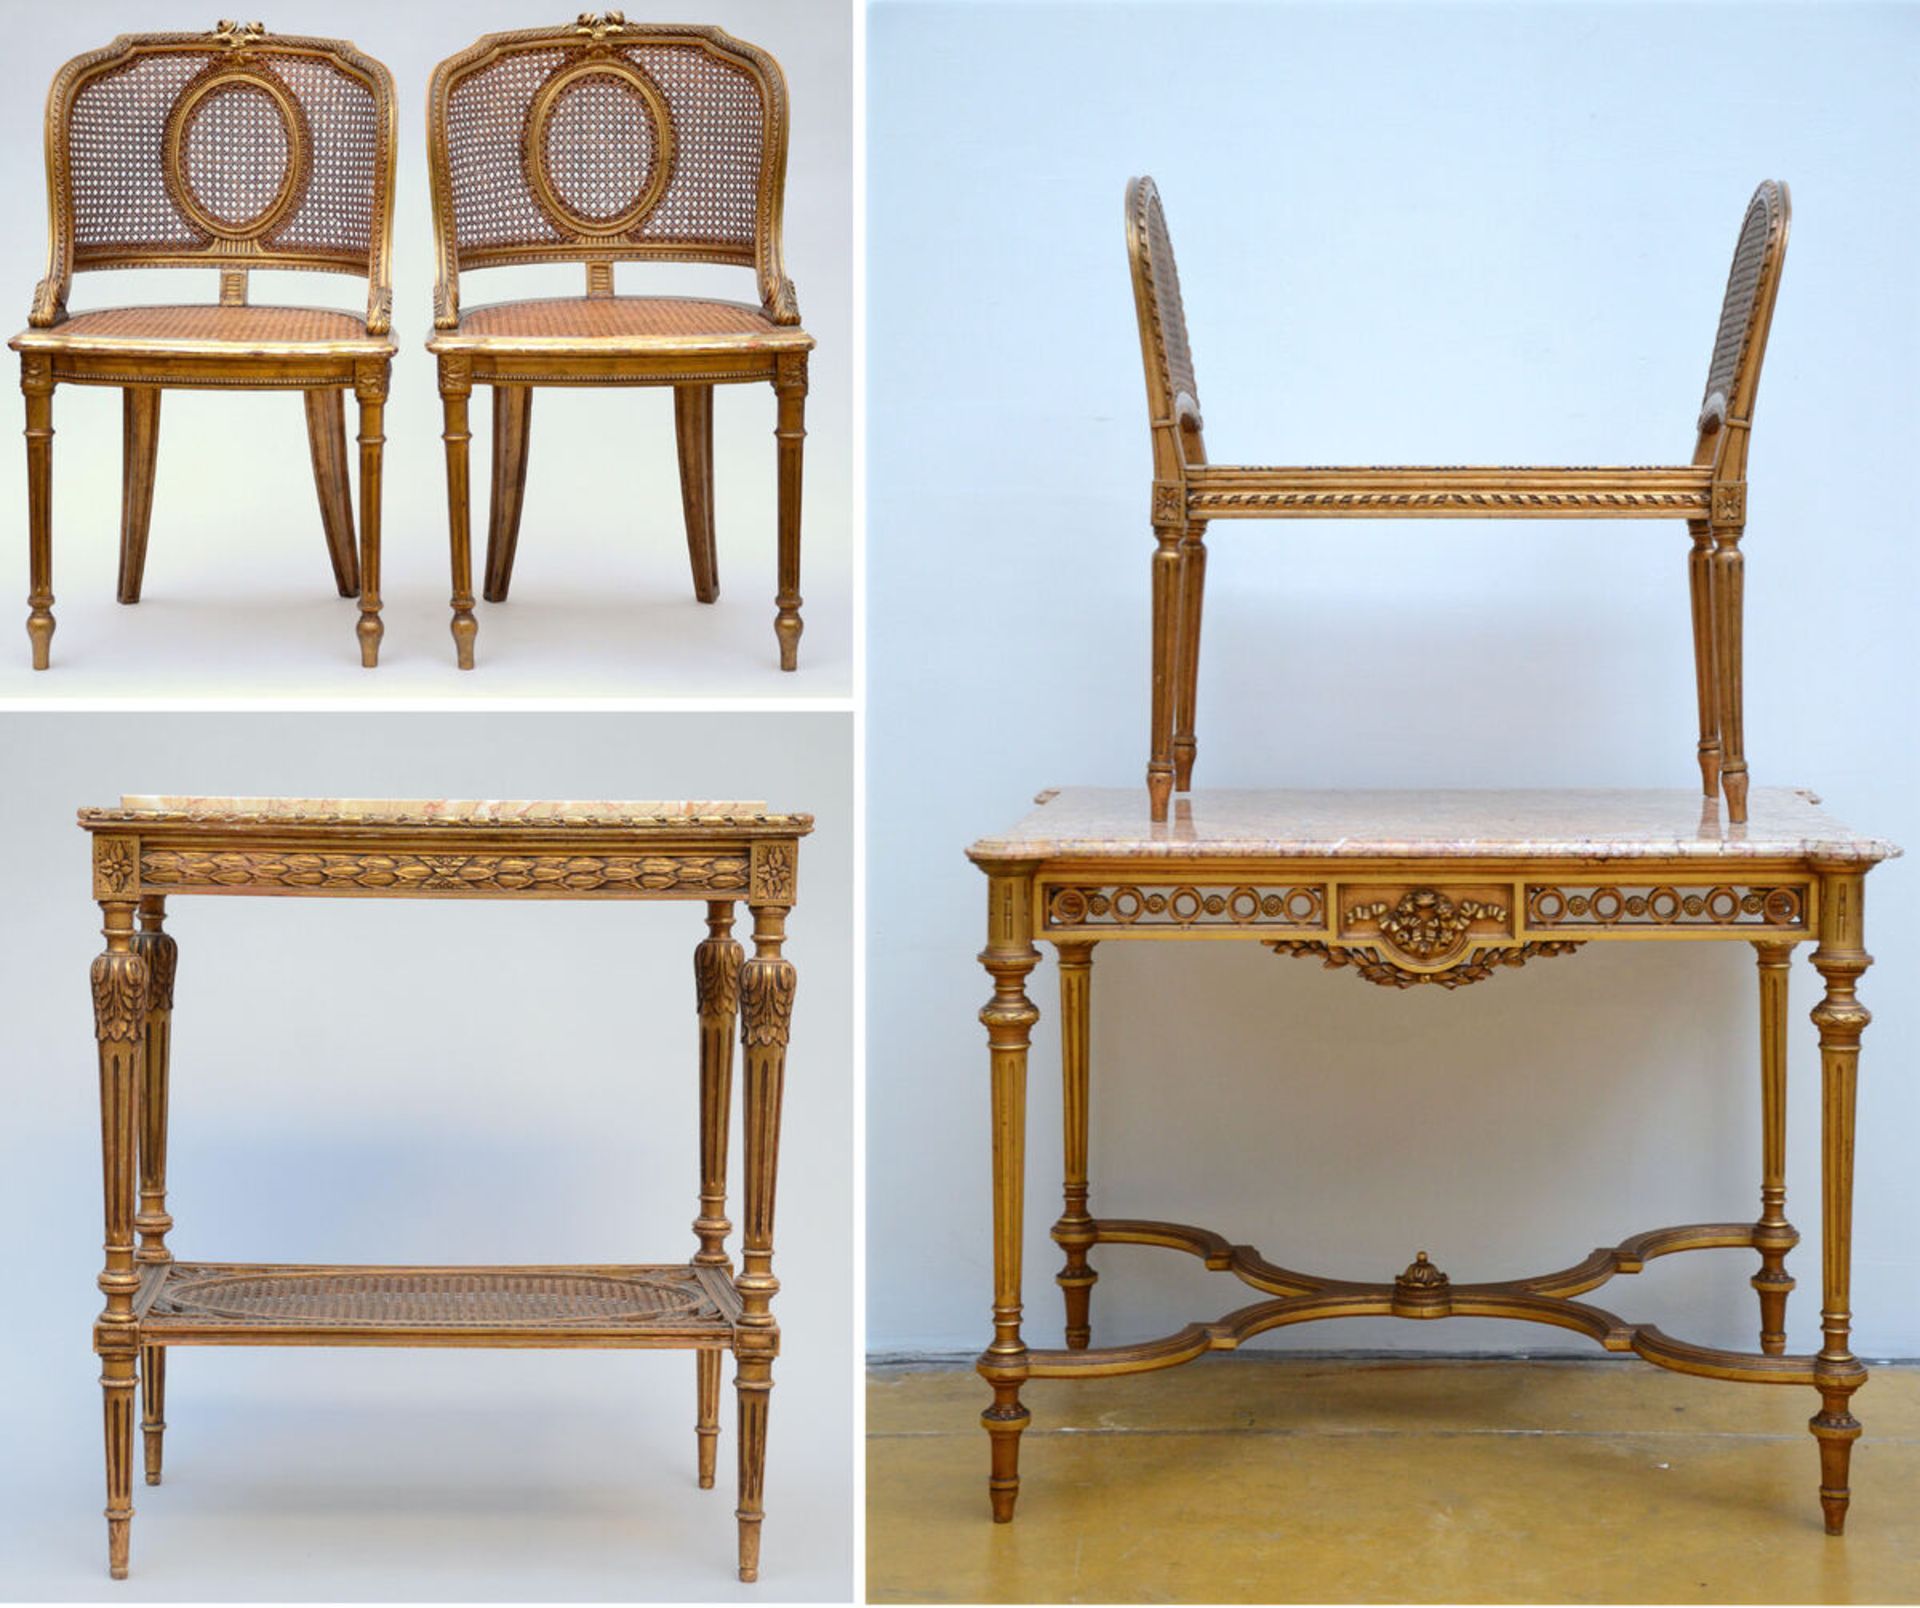 Lot: gilt Louis XVI style furniture: two tables, a pair of armchairs and a bench